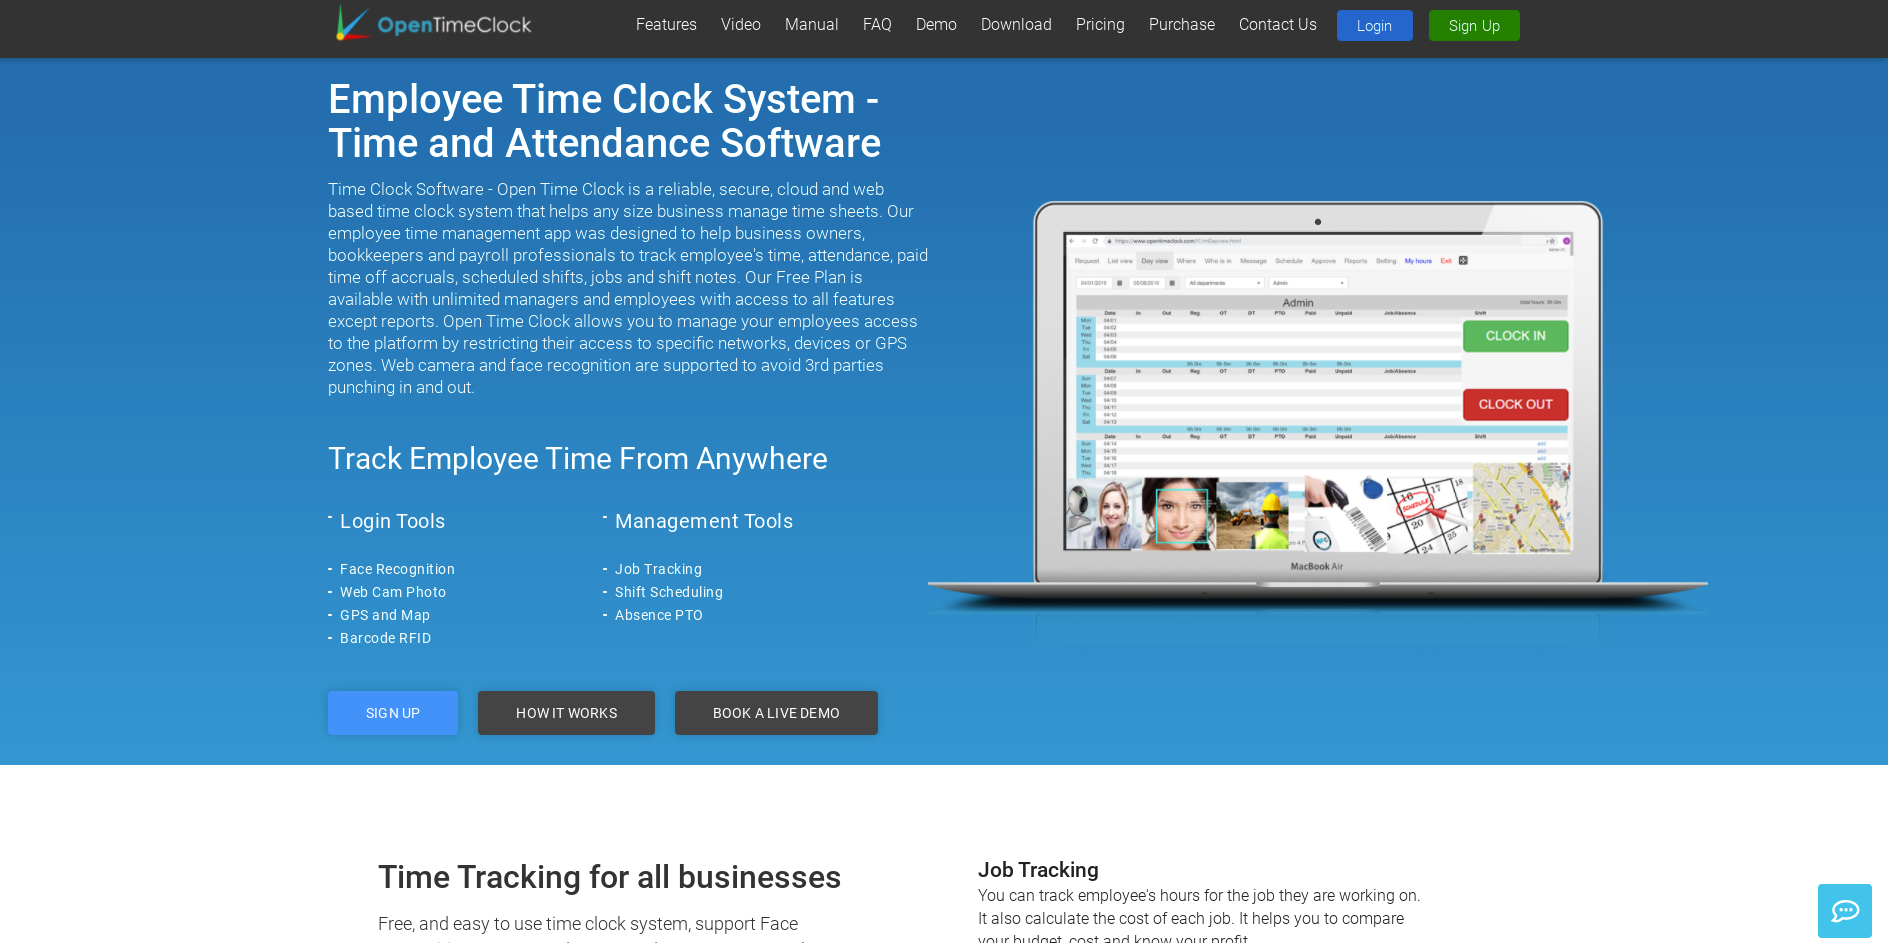 OpenTimeClock - employee time clock system